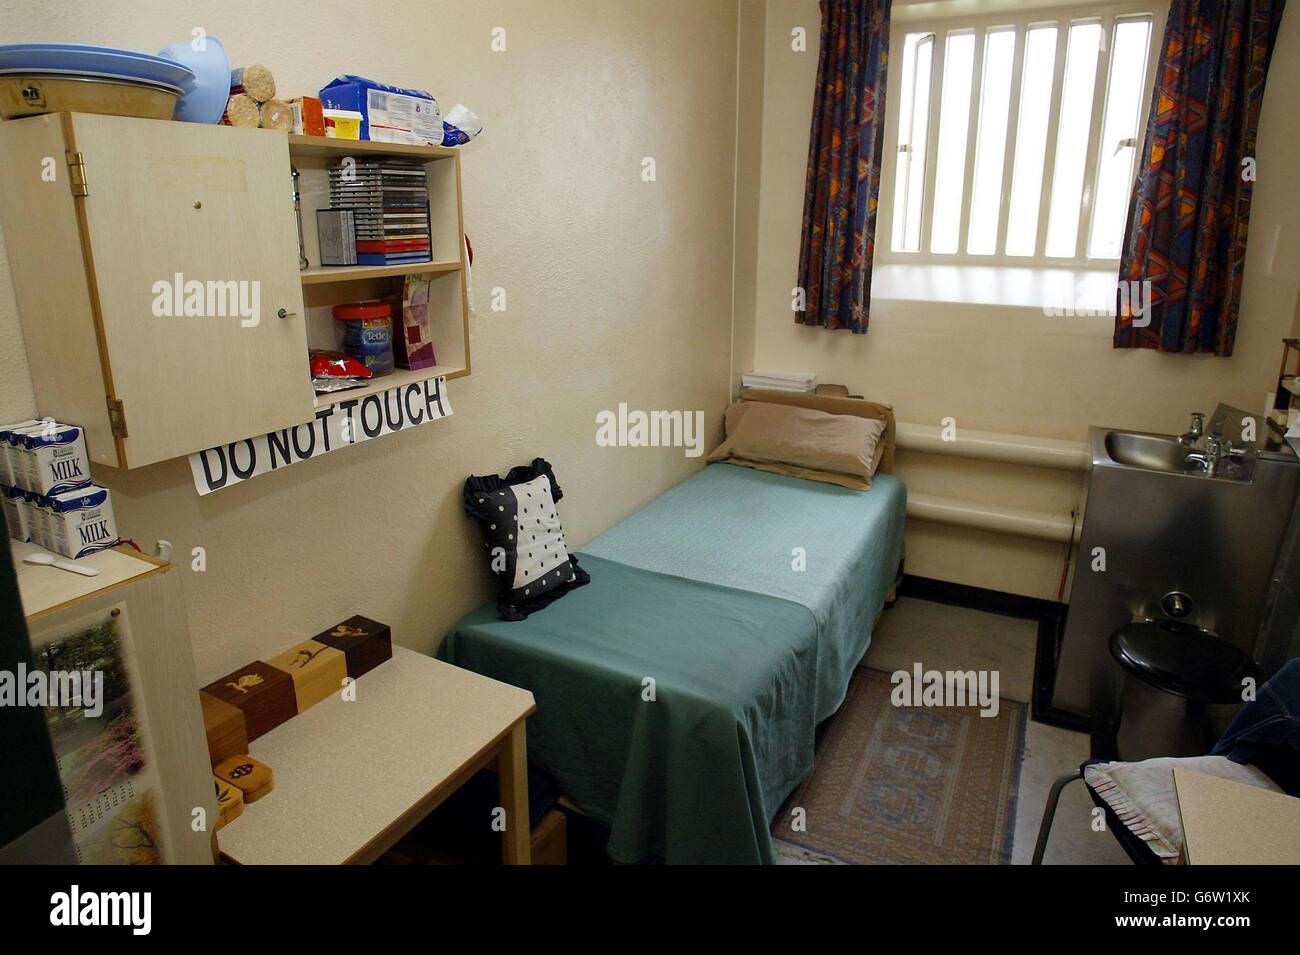 The standard cell D-wing at Wakefield Prison, West Yorkshire. Prison staff at Wakefield, which holds 570 inmates, 70% of whom are serving life and 20% serving 10 years or more, were criticised for their 'disrespectful' attitude to offenders in their care. Chief Inspector of Prisons Anne Owers found there was an 'extremely high' number of complaints from inmates about bullying, although they added that procedures to deal with the complaints were thorough. Stock Photo